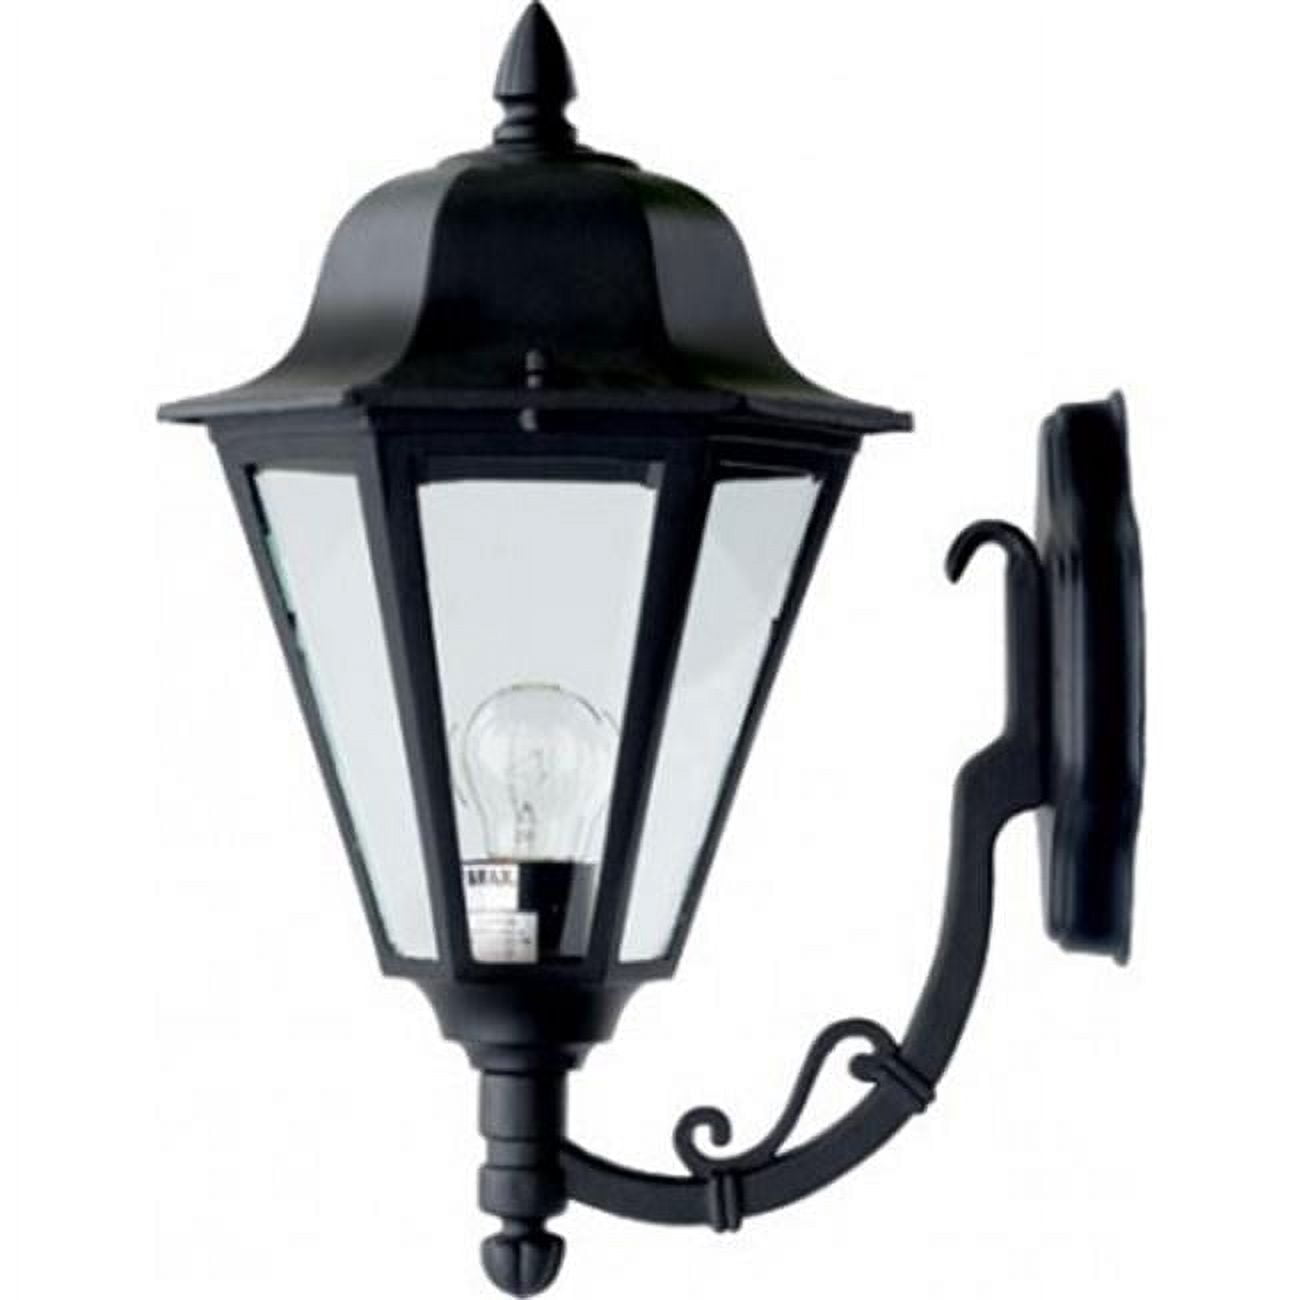 Picture of Dabmar Lighting GM134-B-FROST 13W & 120V S13-GU24 Daniella Wall Light Fixture with Frosted Glass - Black